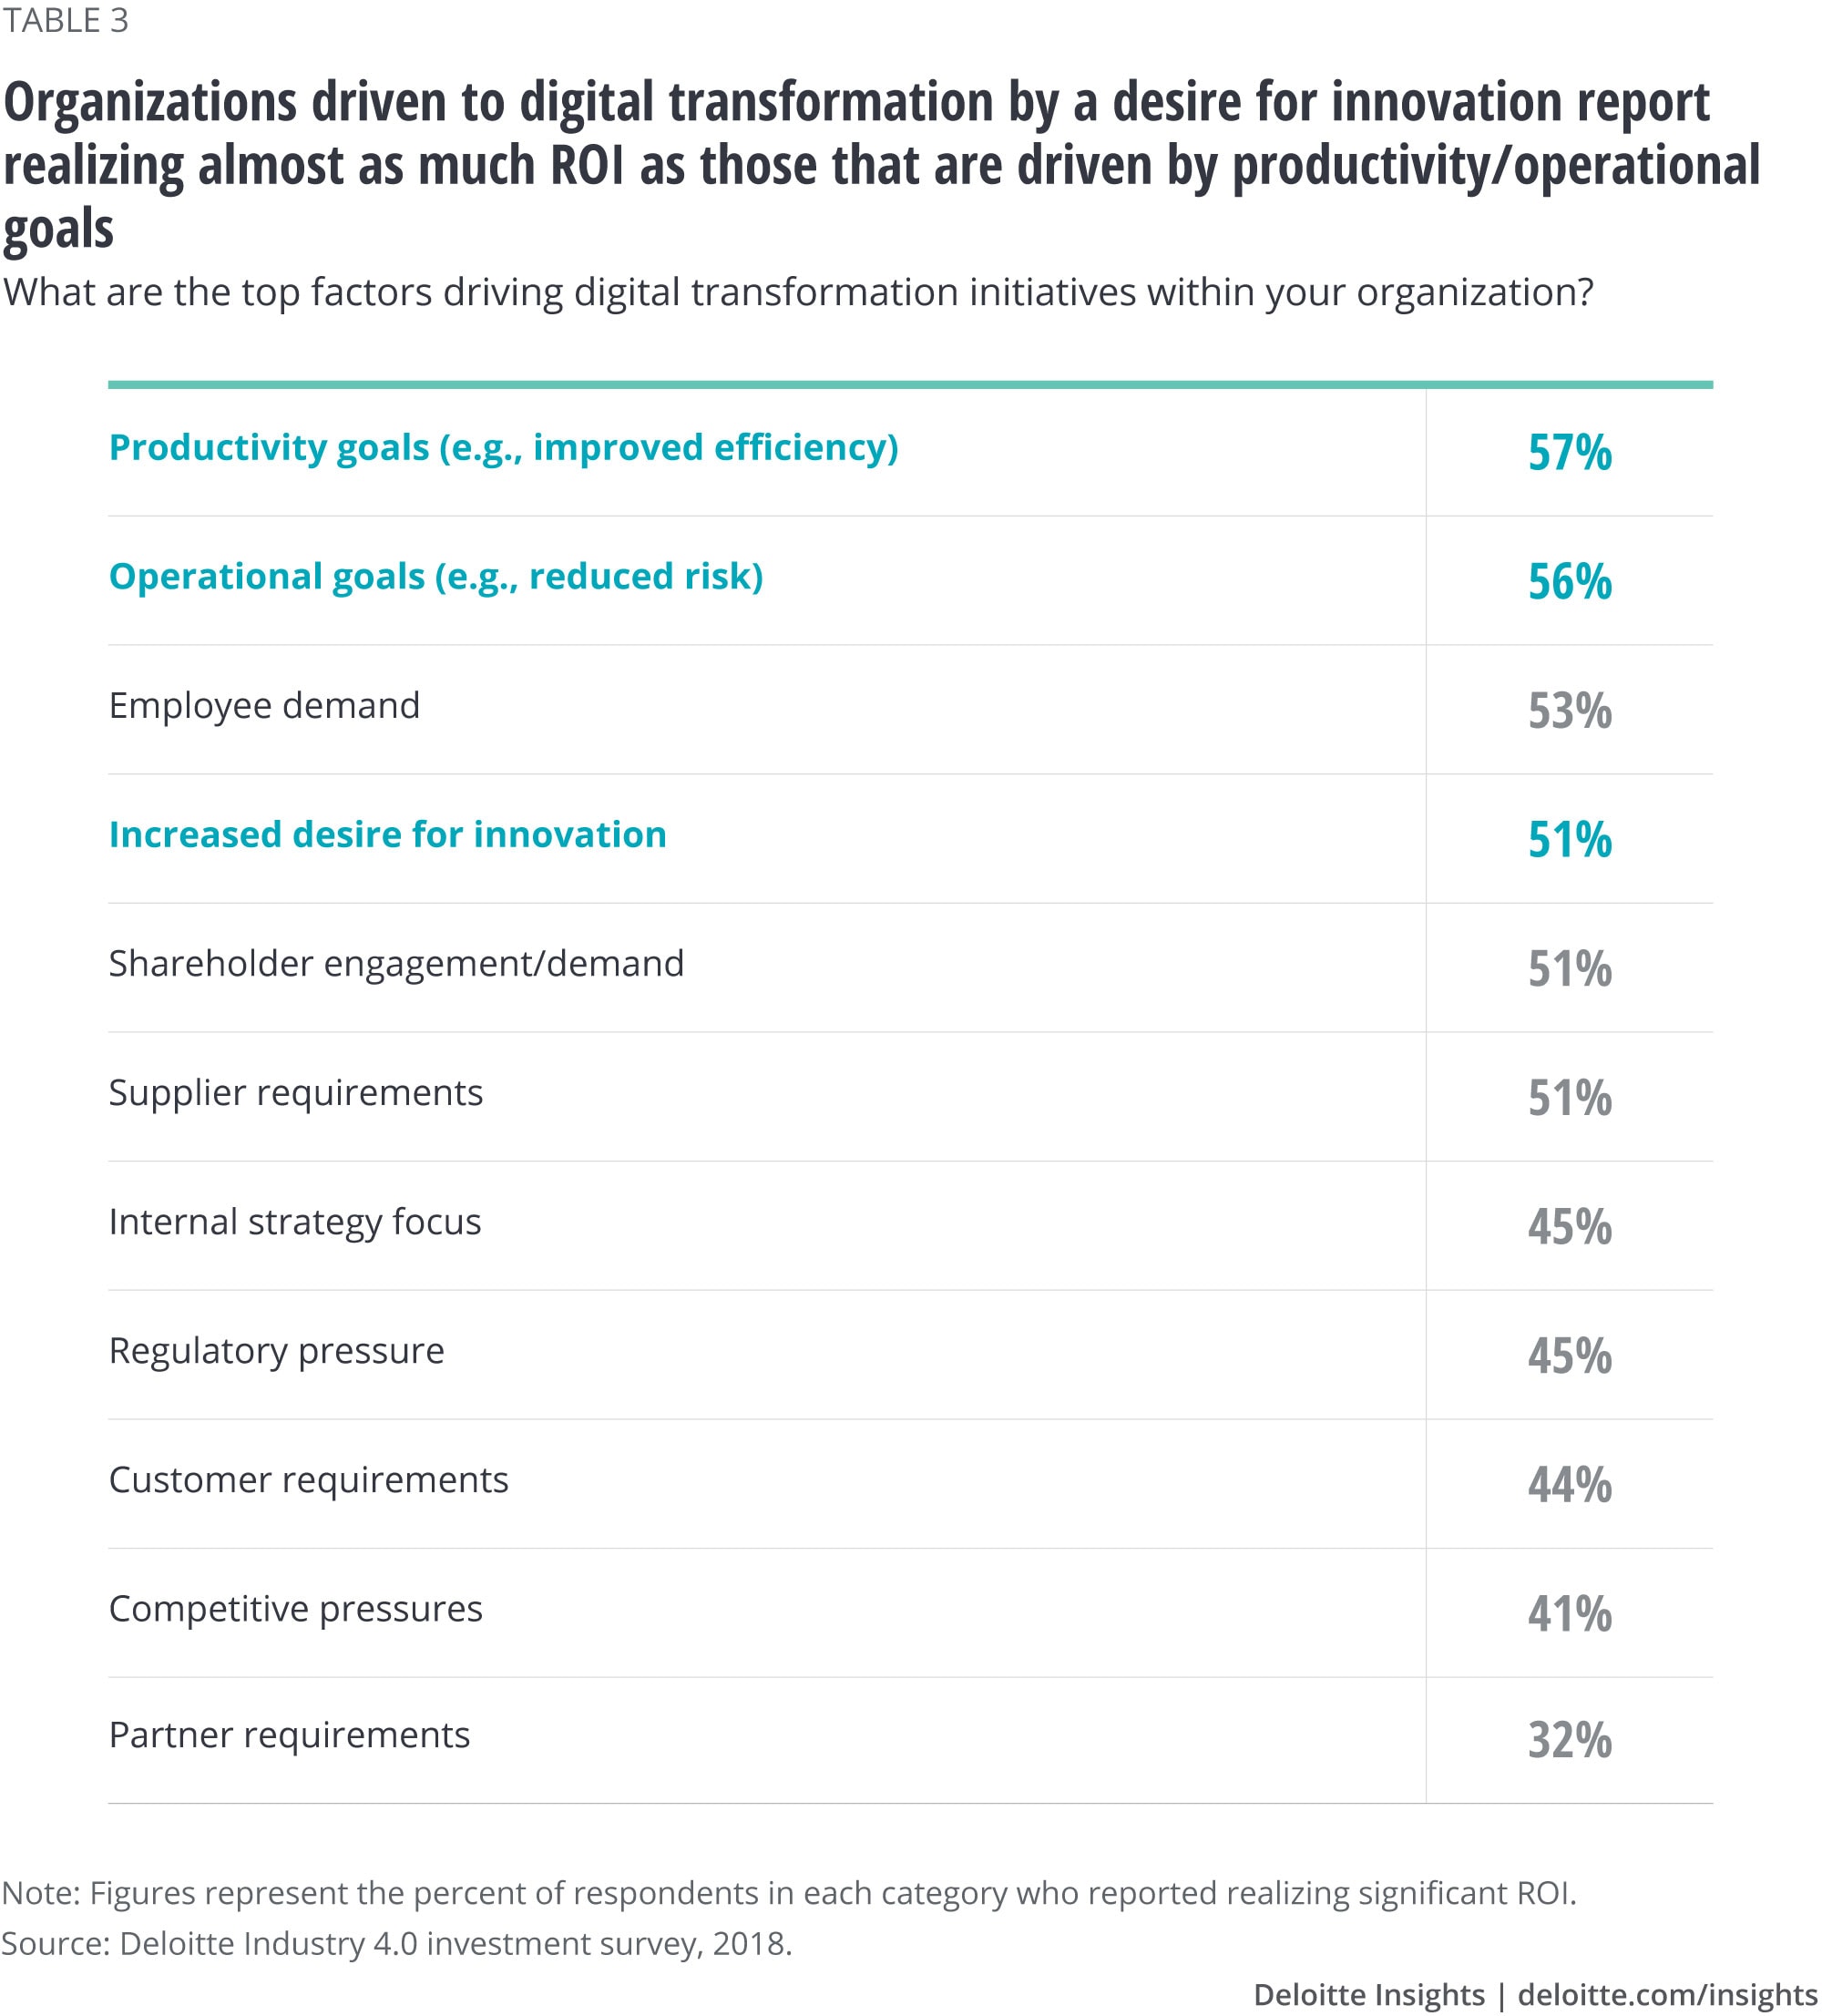 Organizations driven to digital transformation by a desire for innovation realize almost as much ROI as those that are driven by productivity/operational goals